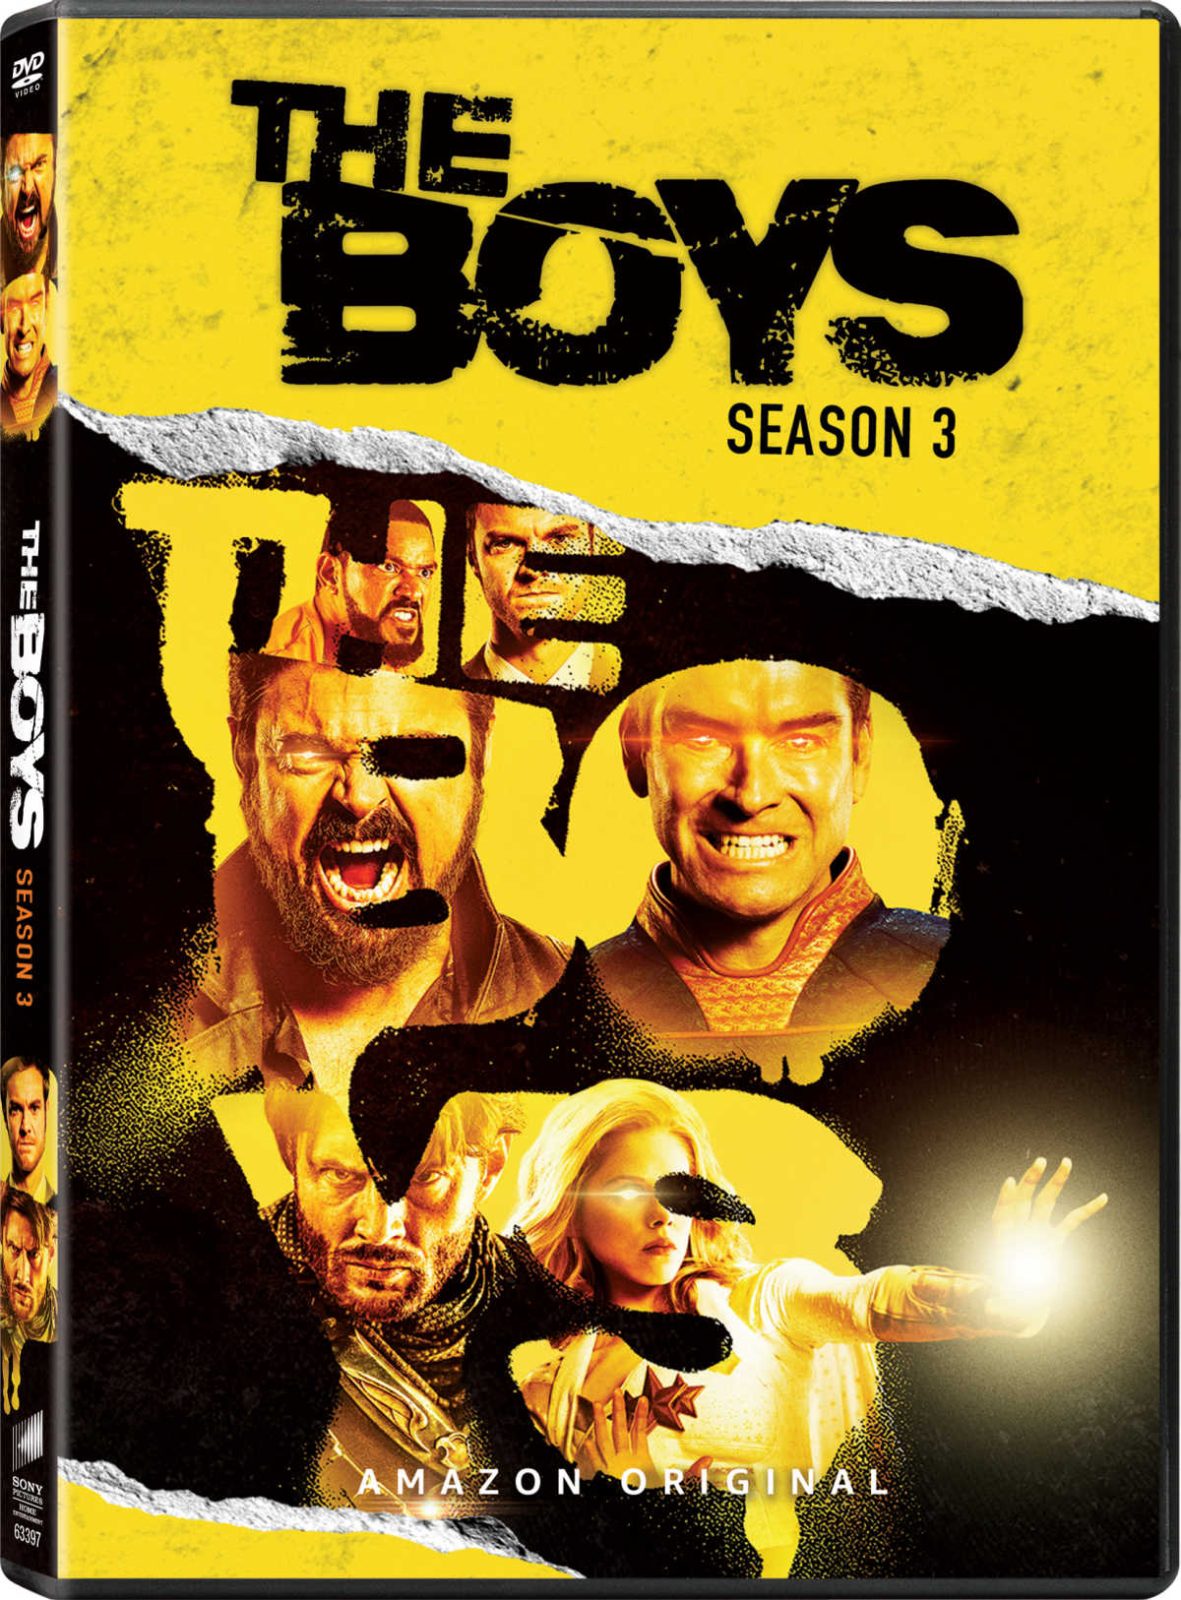 The Boys Season 3 has finally arrived on Blu-ray and DVD! This season was even wilder than the last, with more blood, guts, and superheroes than you can shake a stick at. And now you can bring all the mayhem home with you, thanks to this exclusive release.